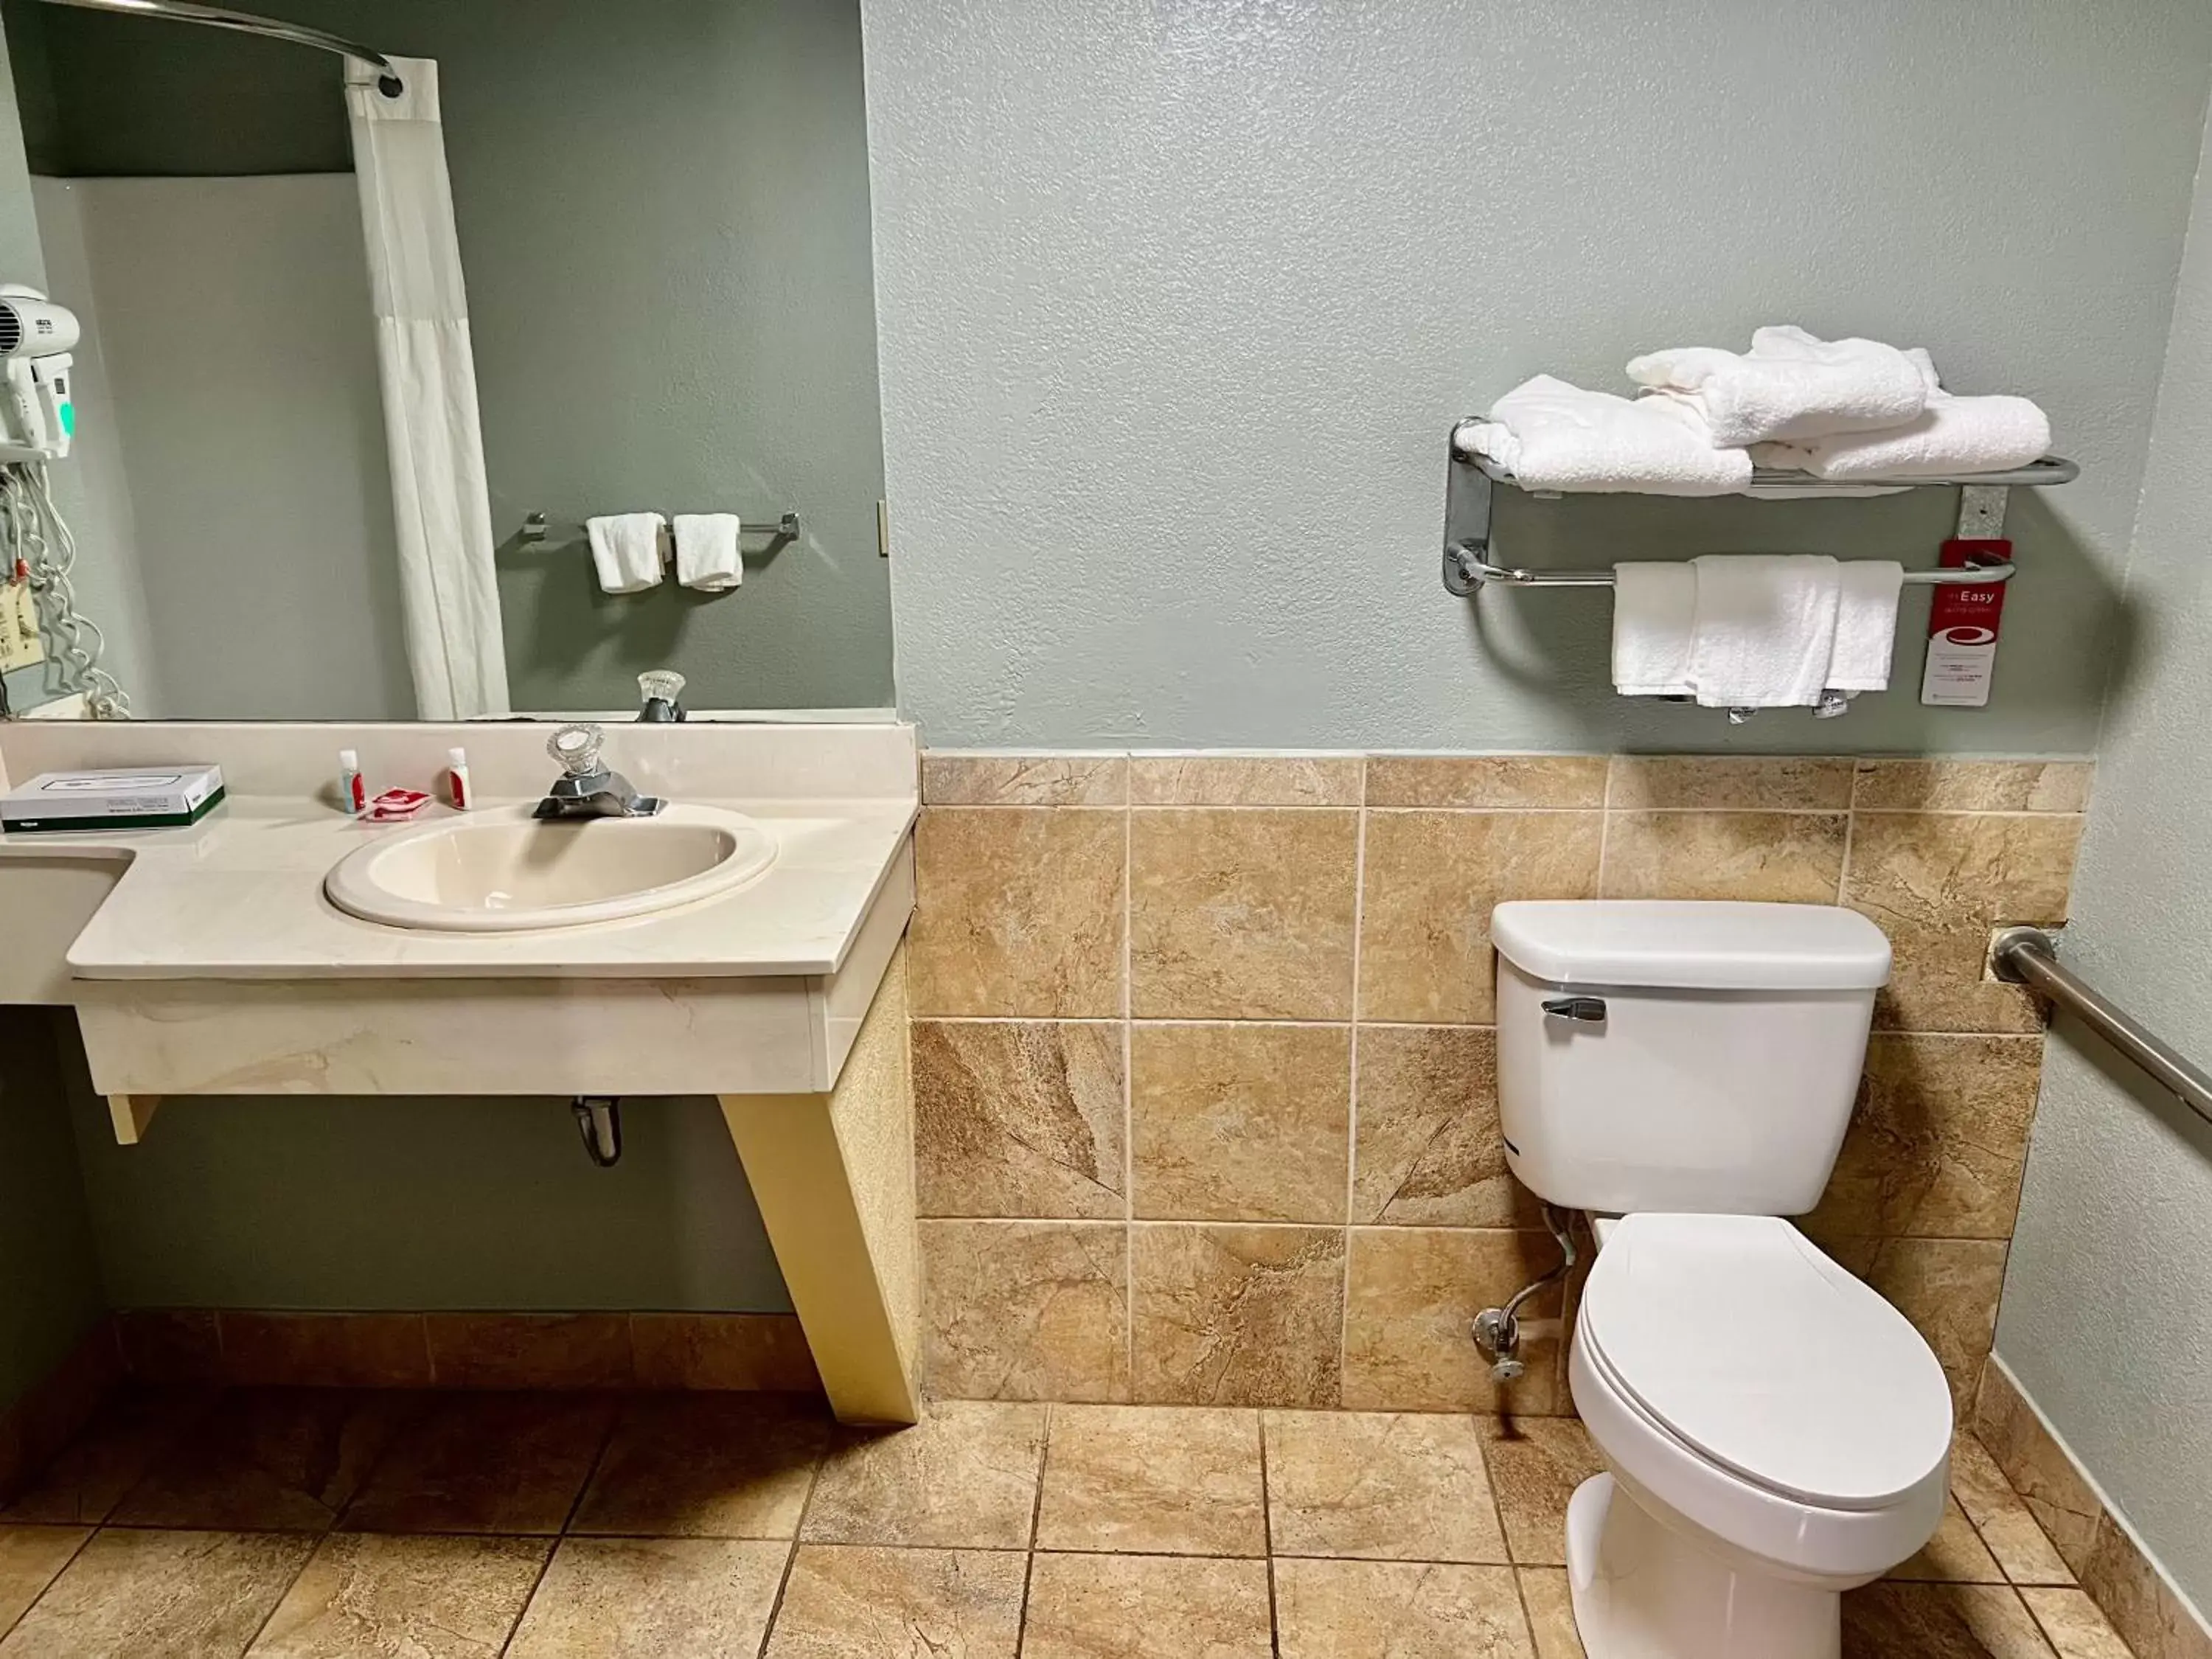 Facility for disabled guests, Bathroom in Econo Lodge Sanford NC